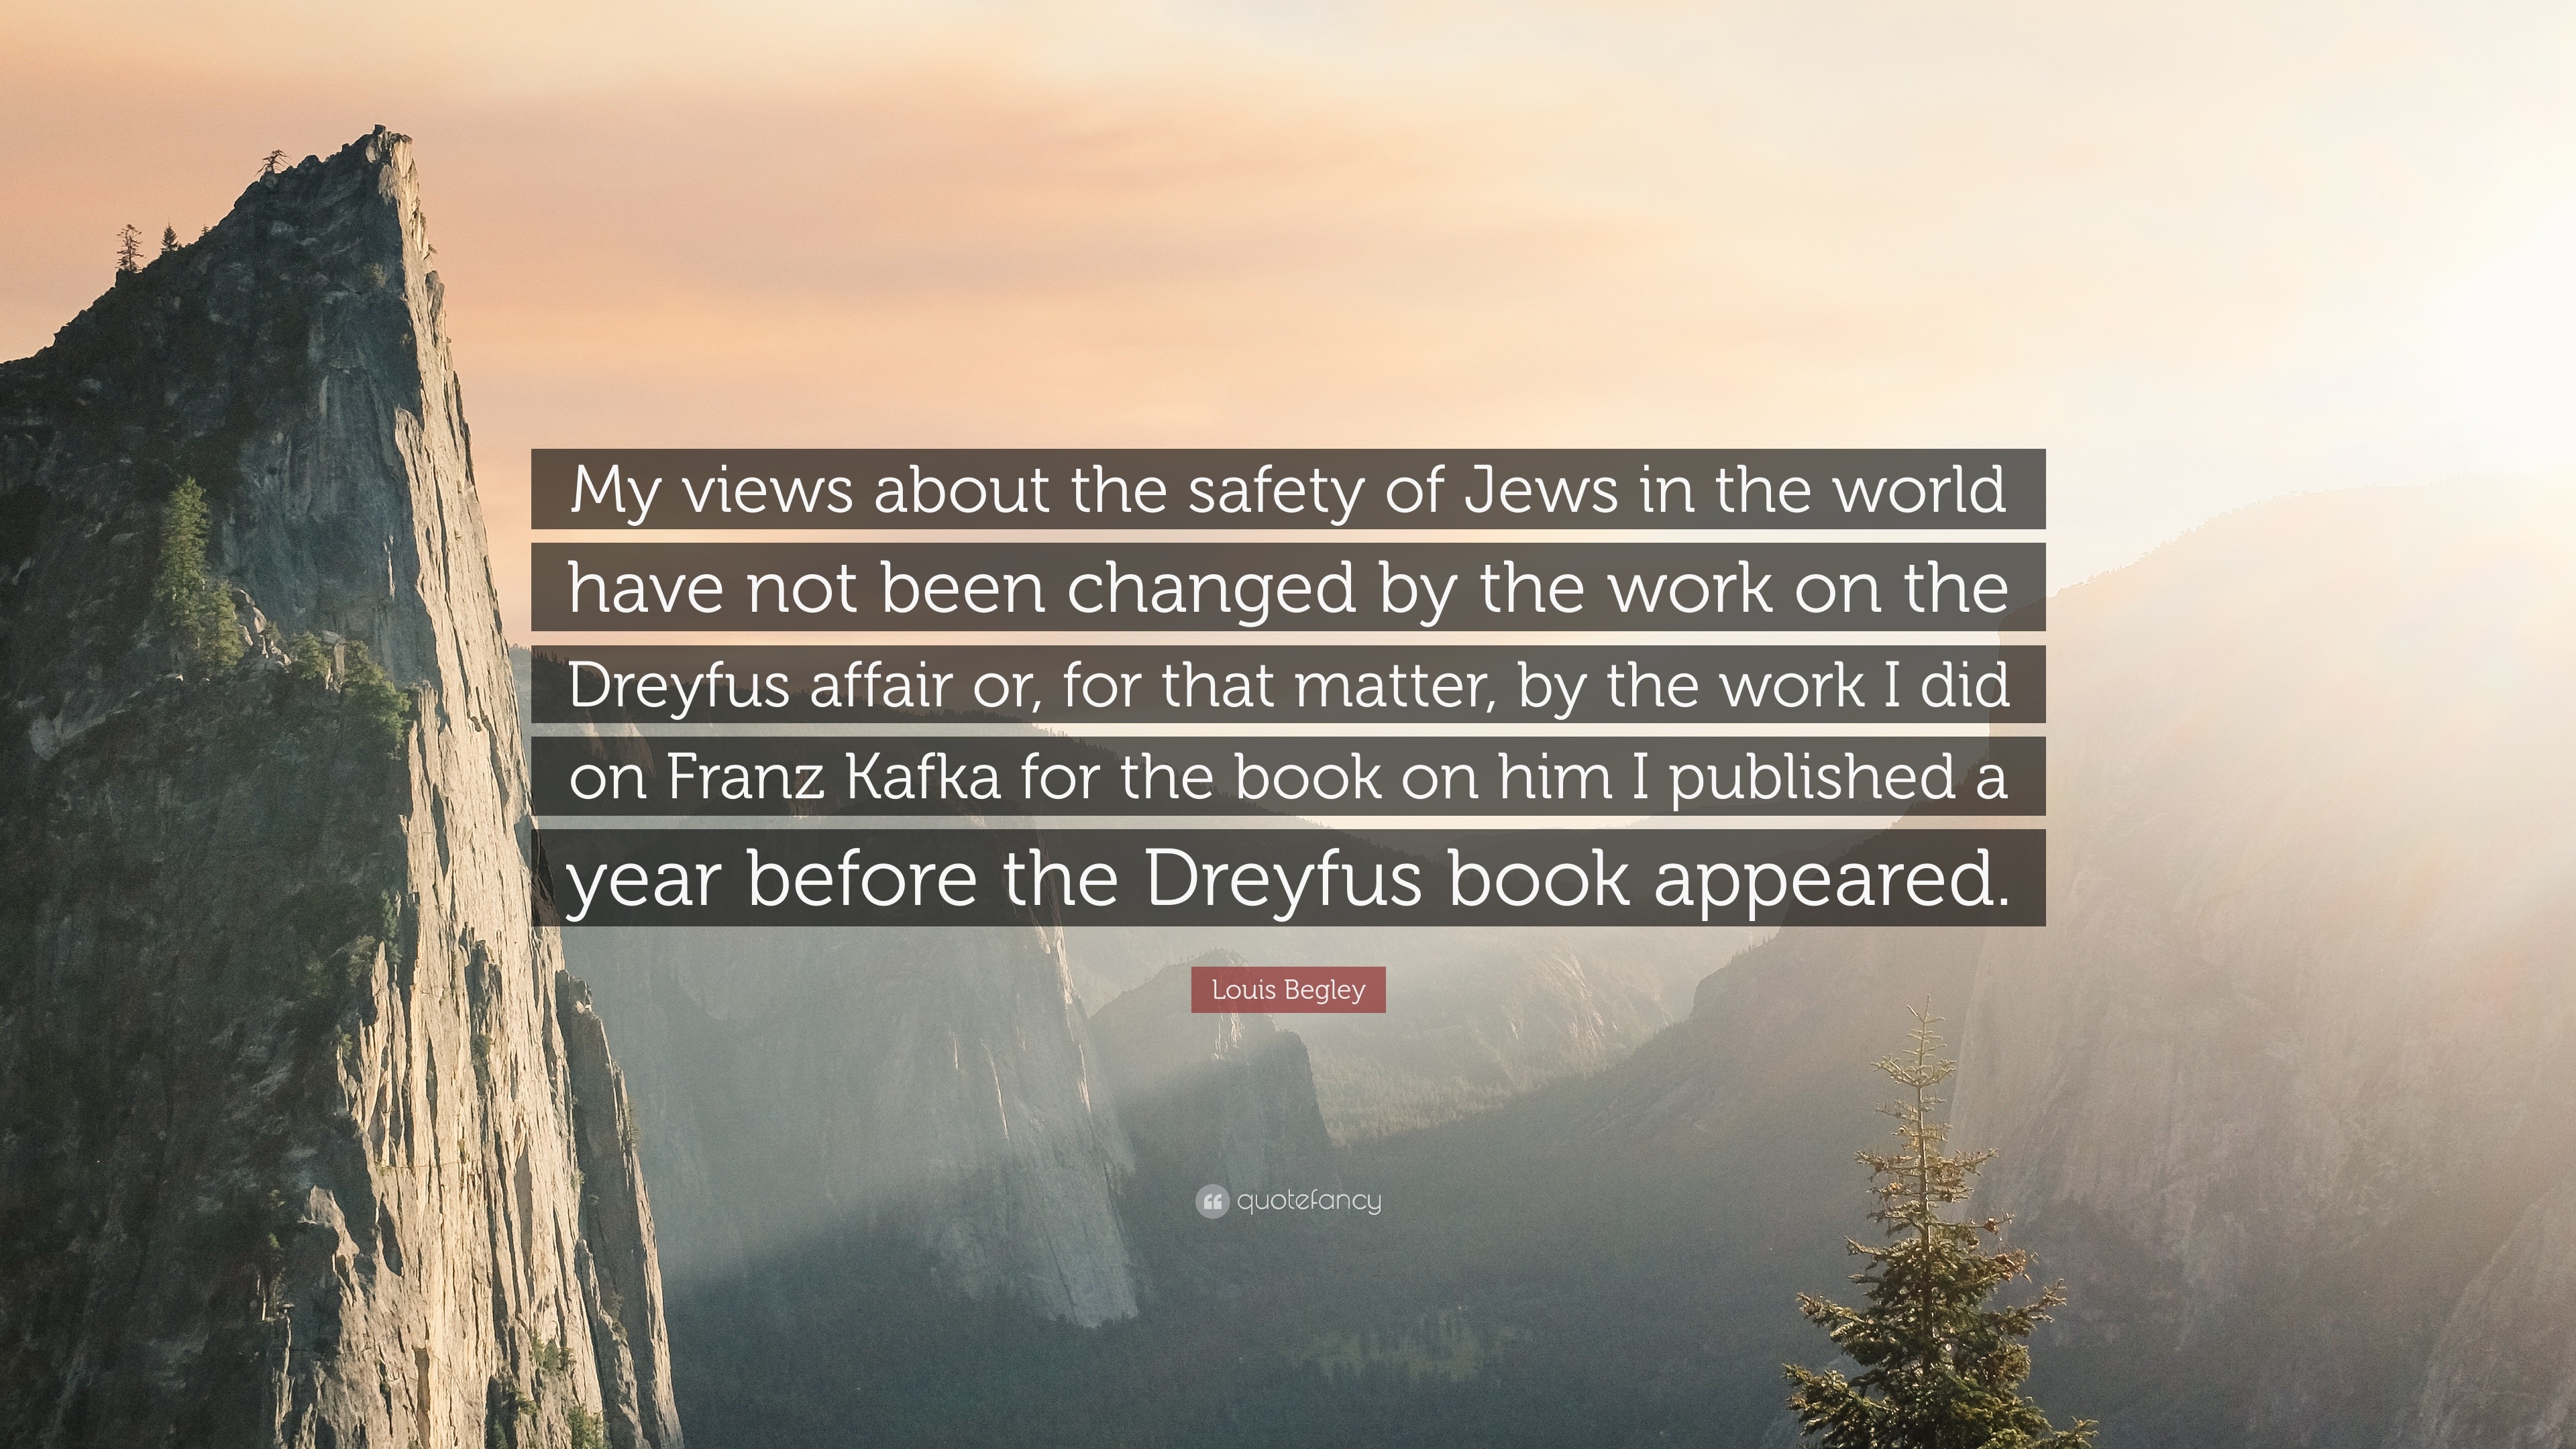 Louis Begley Quote: “My views about the safety of Jews in the world have not been changed by the ...